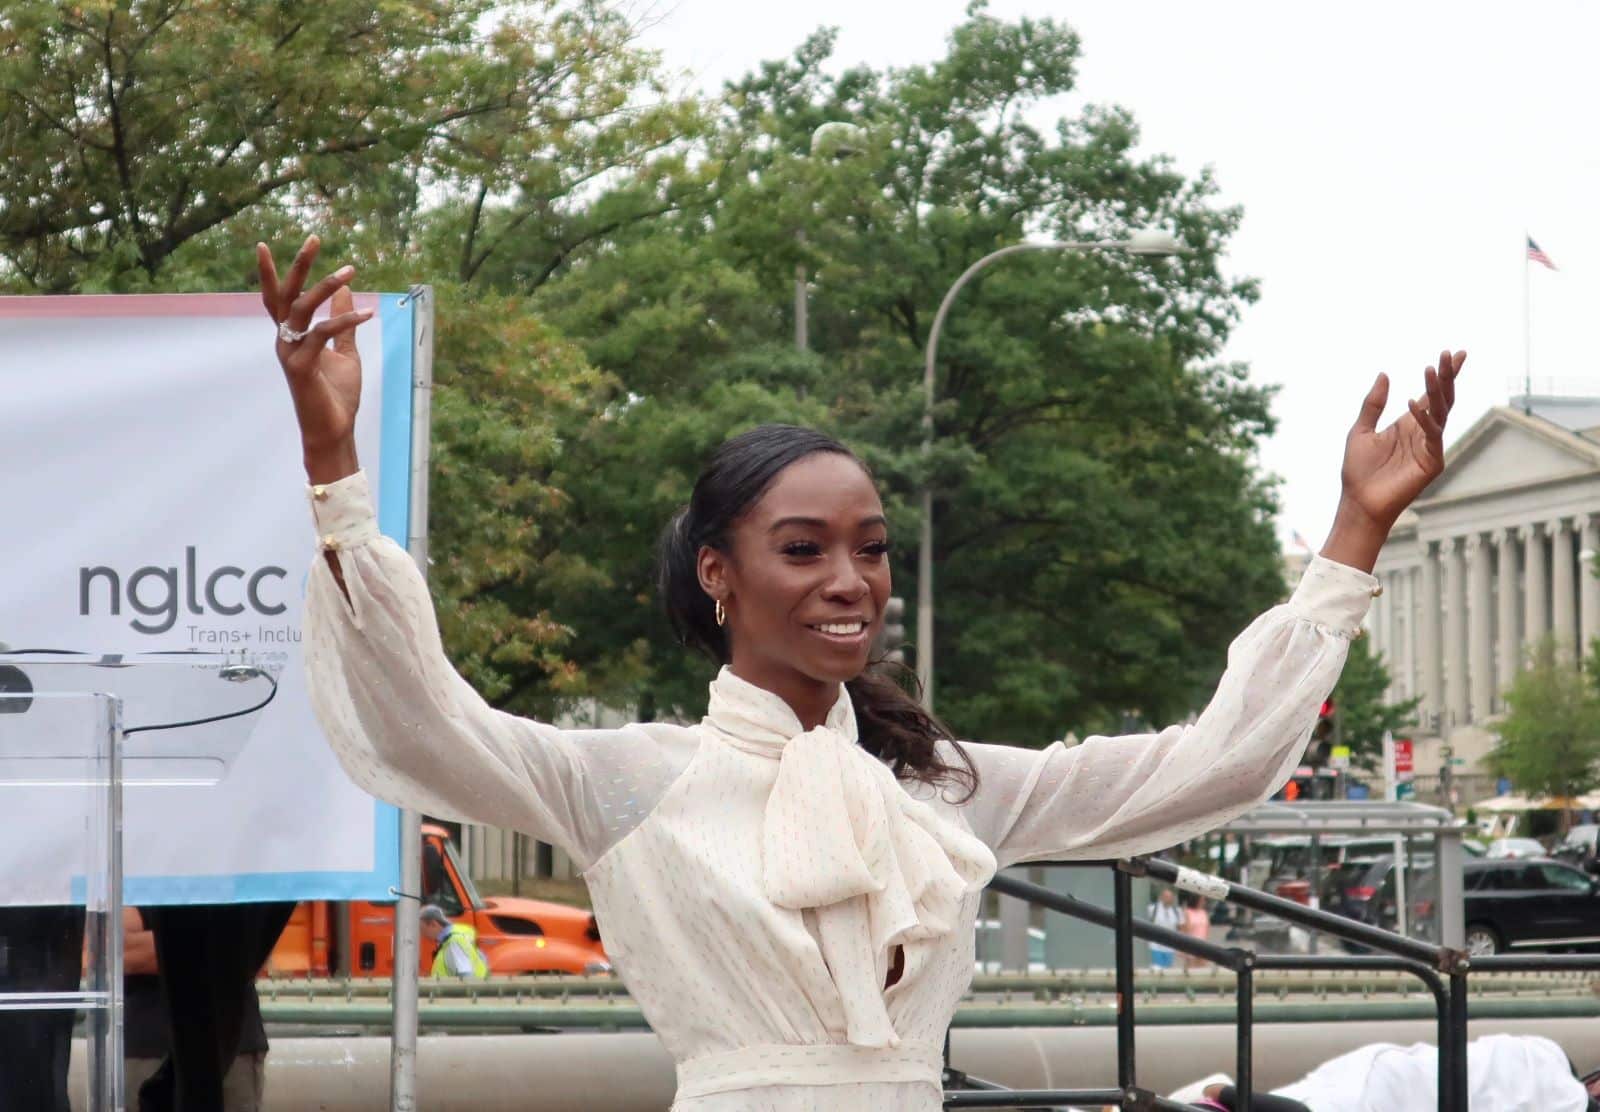 <p class="wp-caption-text">Image Credit: Shutterstock / DCStockPhotography</p>  <p><span>Angelica Ross’s performances in “Pose” and “American Horror Story” have made her a prominent figure in transgender representation on screen. Ross has navigated both support and backlash with resilience, using her influence to address issues of race</span></p>